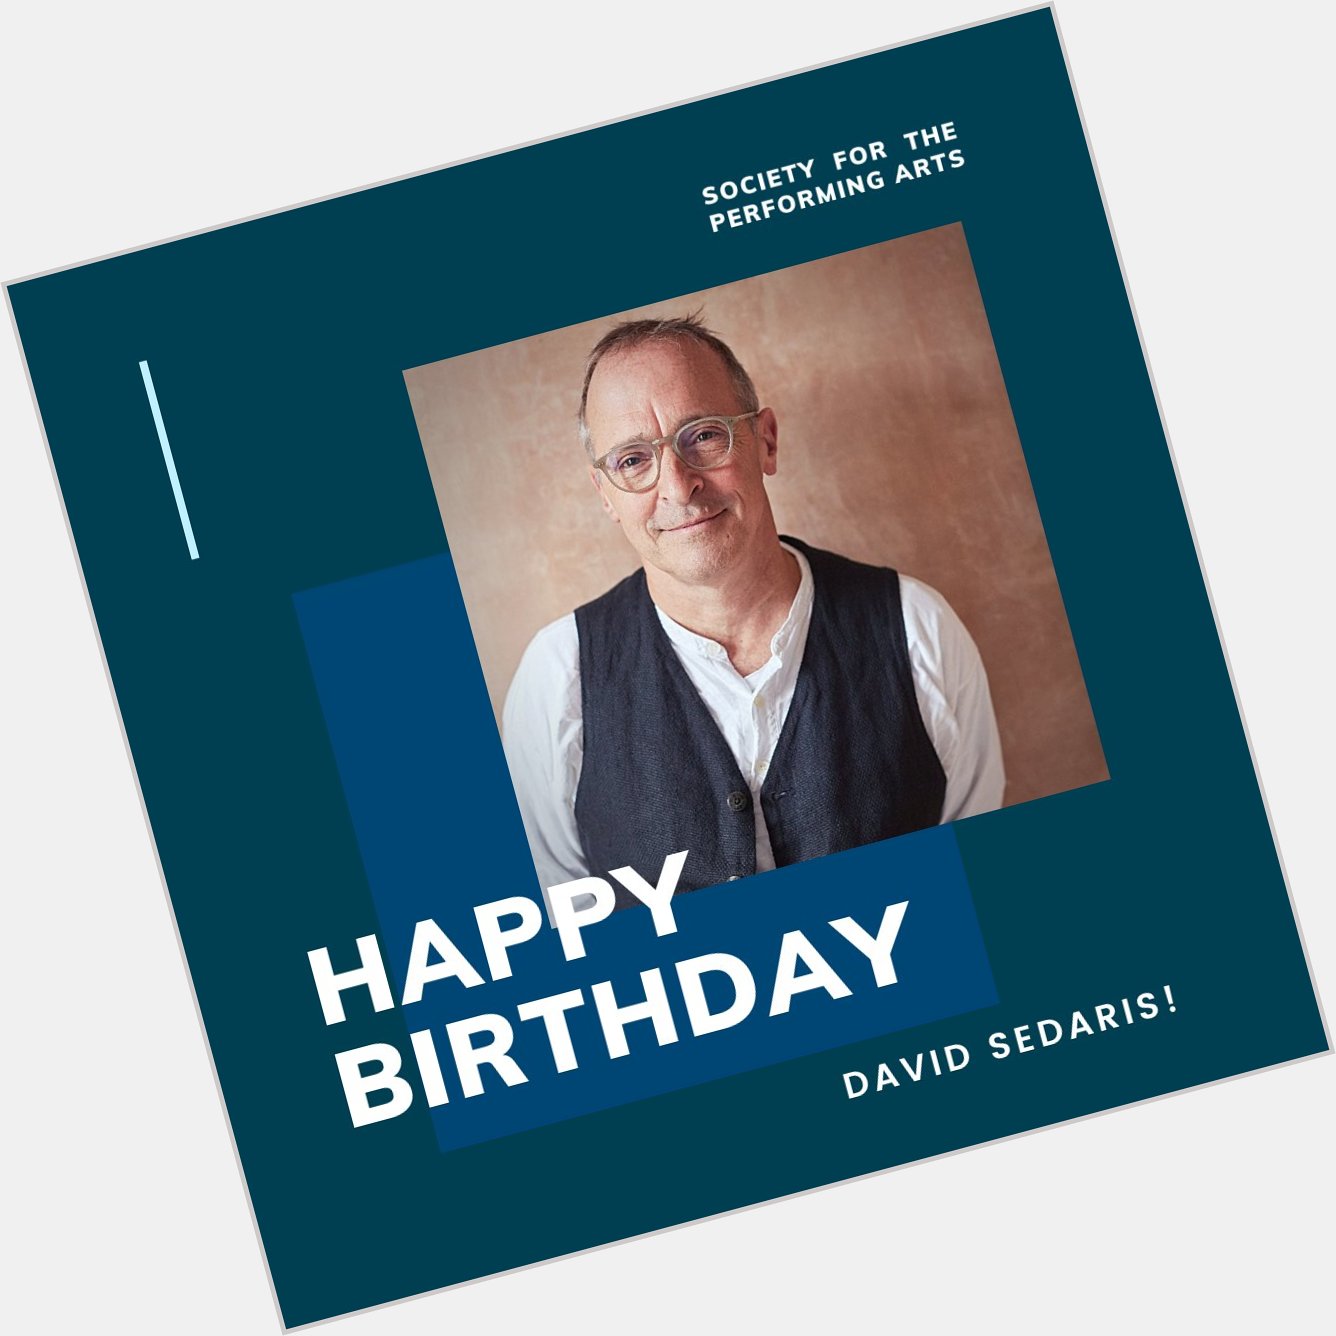 Happy Birthday, David Sedaris! All the best from your friends at SPA Houston. We\ll see you in Houston this April. 